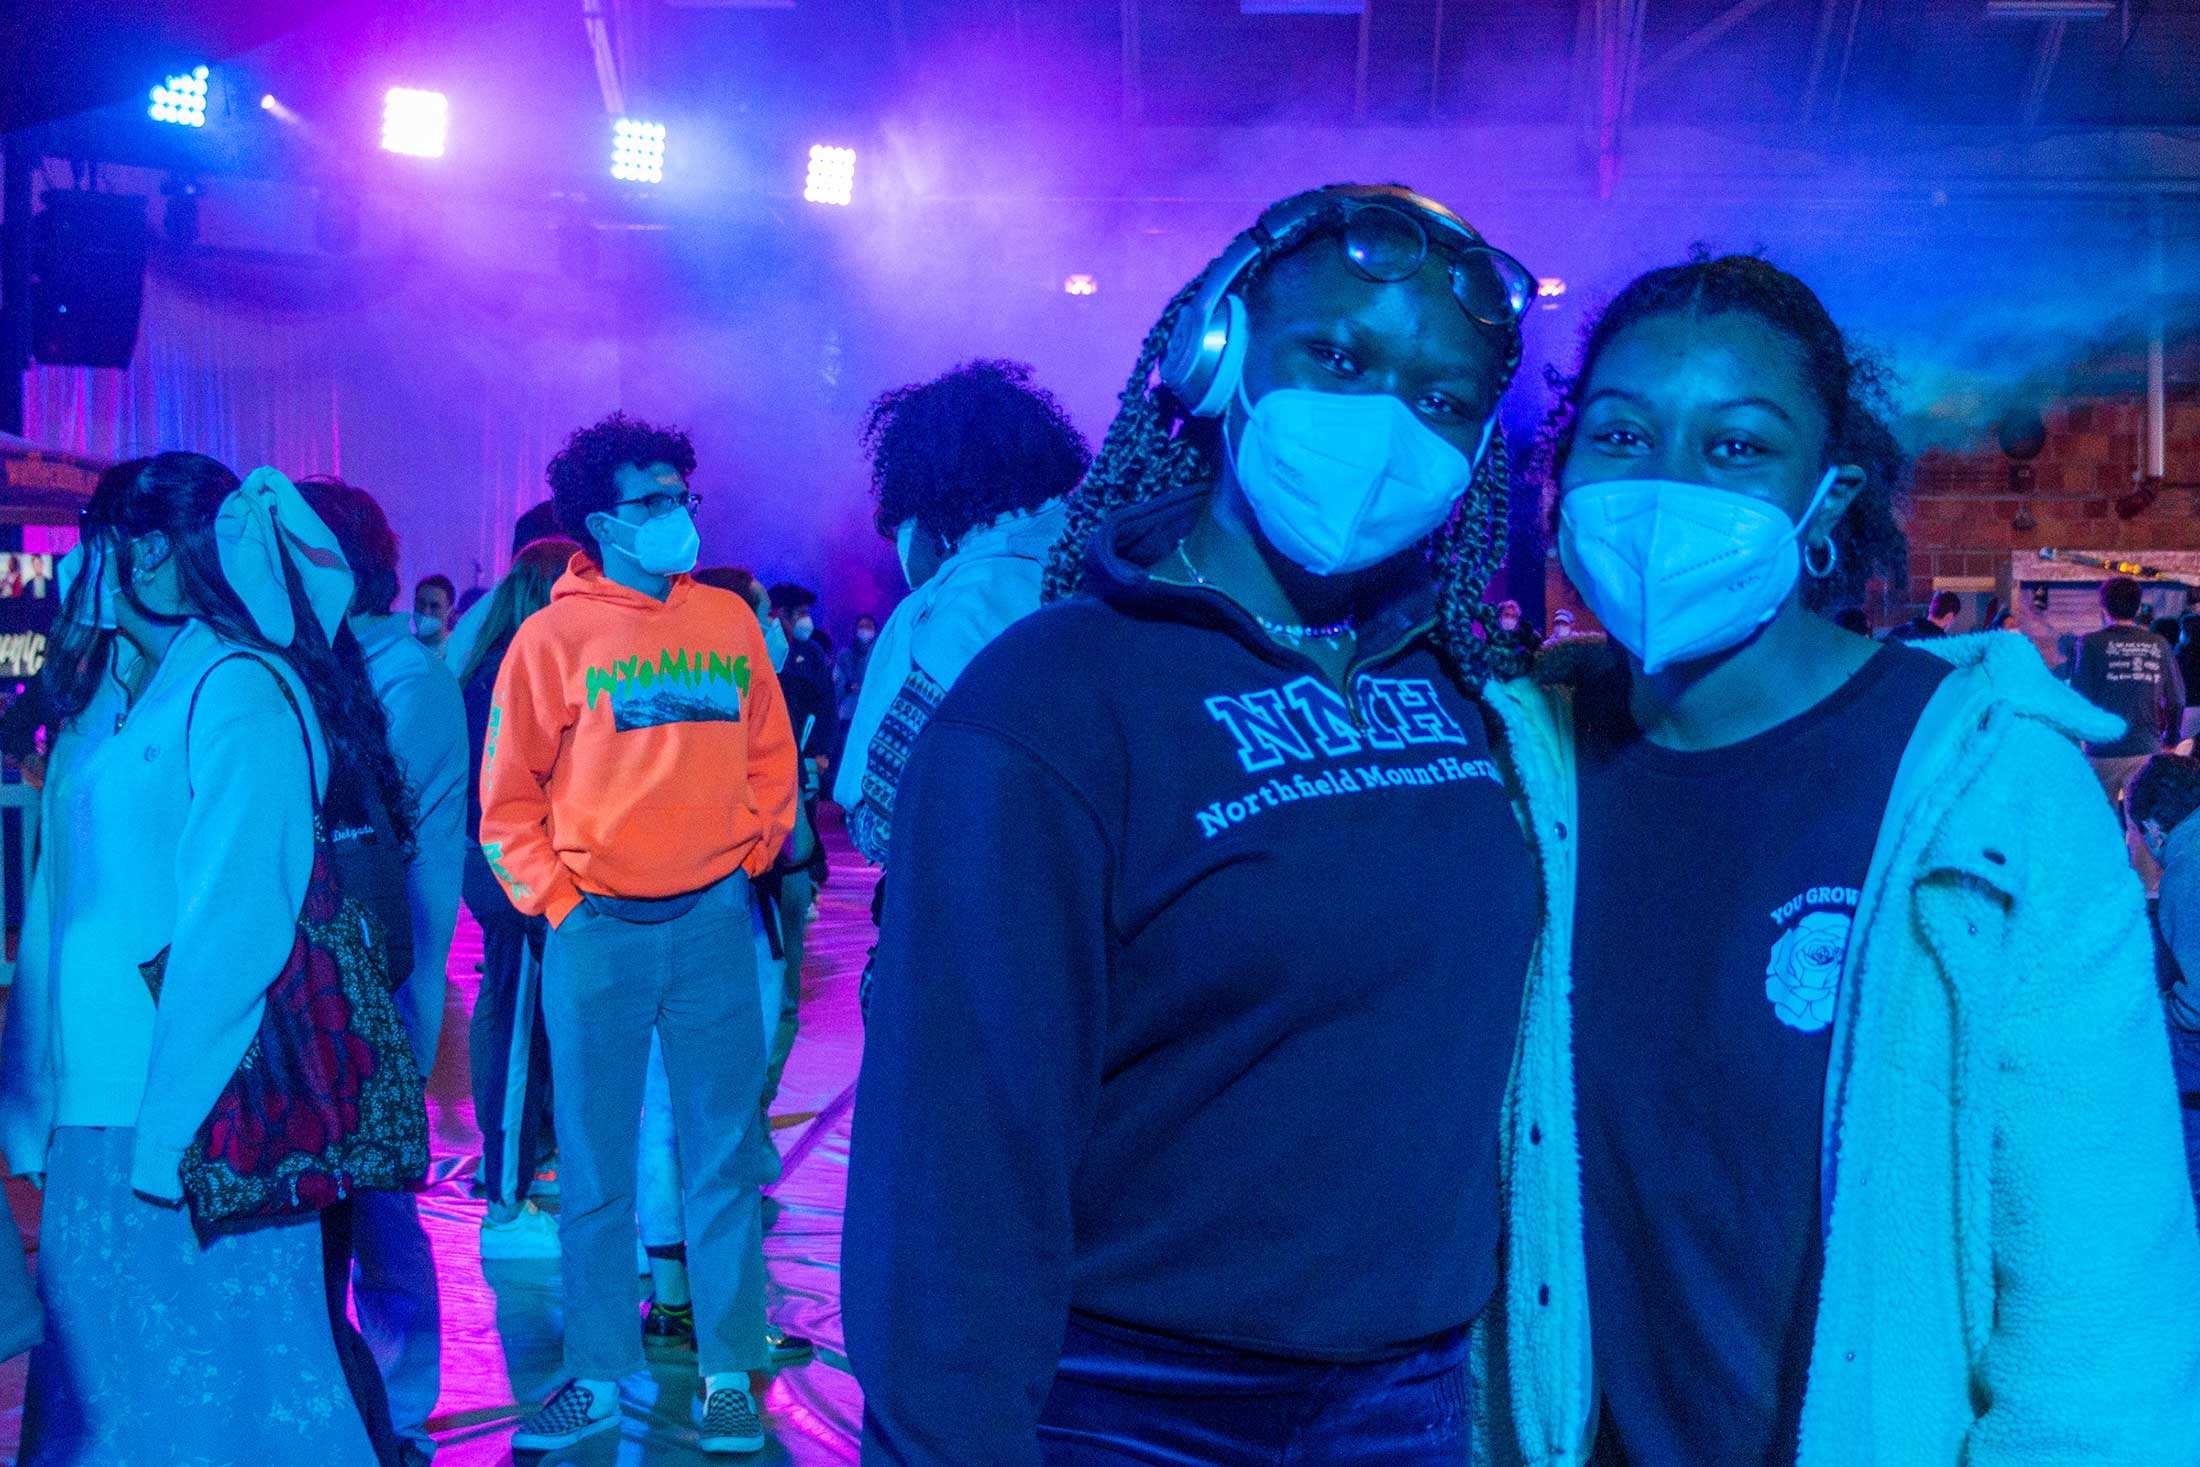 Two students, both wearing face masks, pose for a photo together during Winter Fest activities.